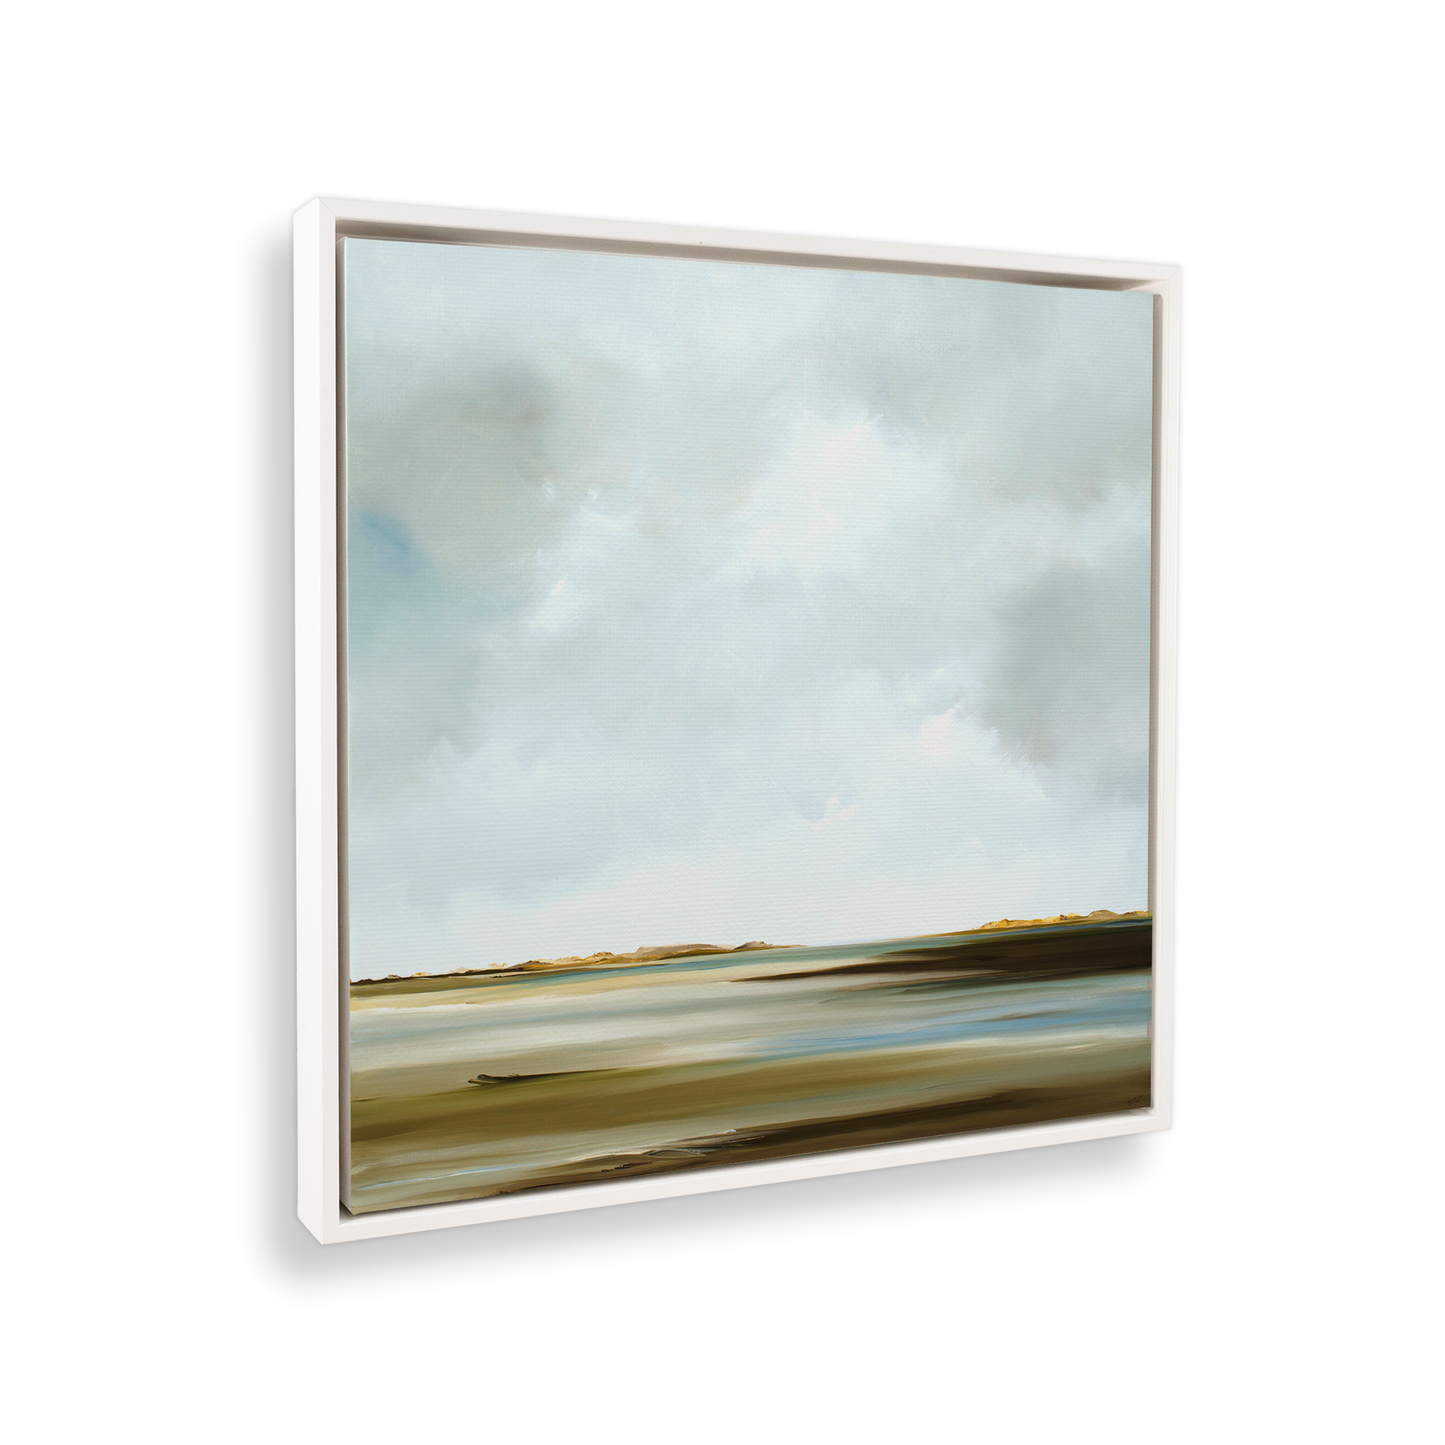 [color:Opaque White],[shape:square], Picture of art in a black frame at angle